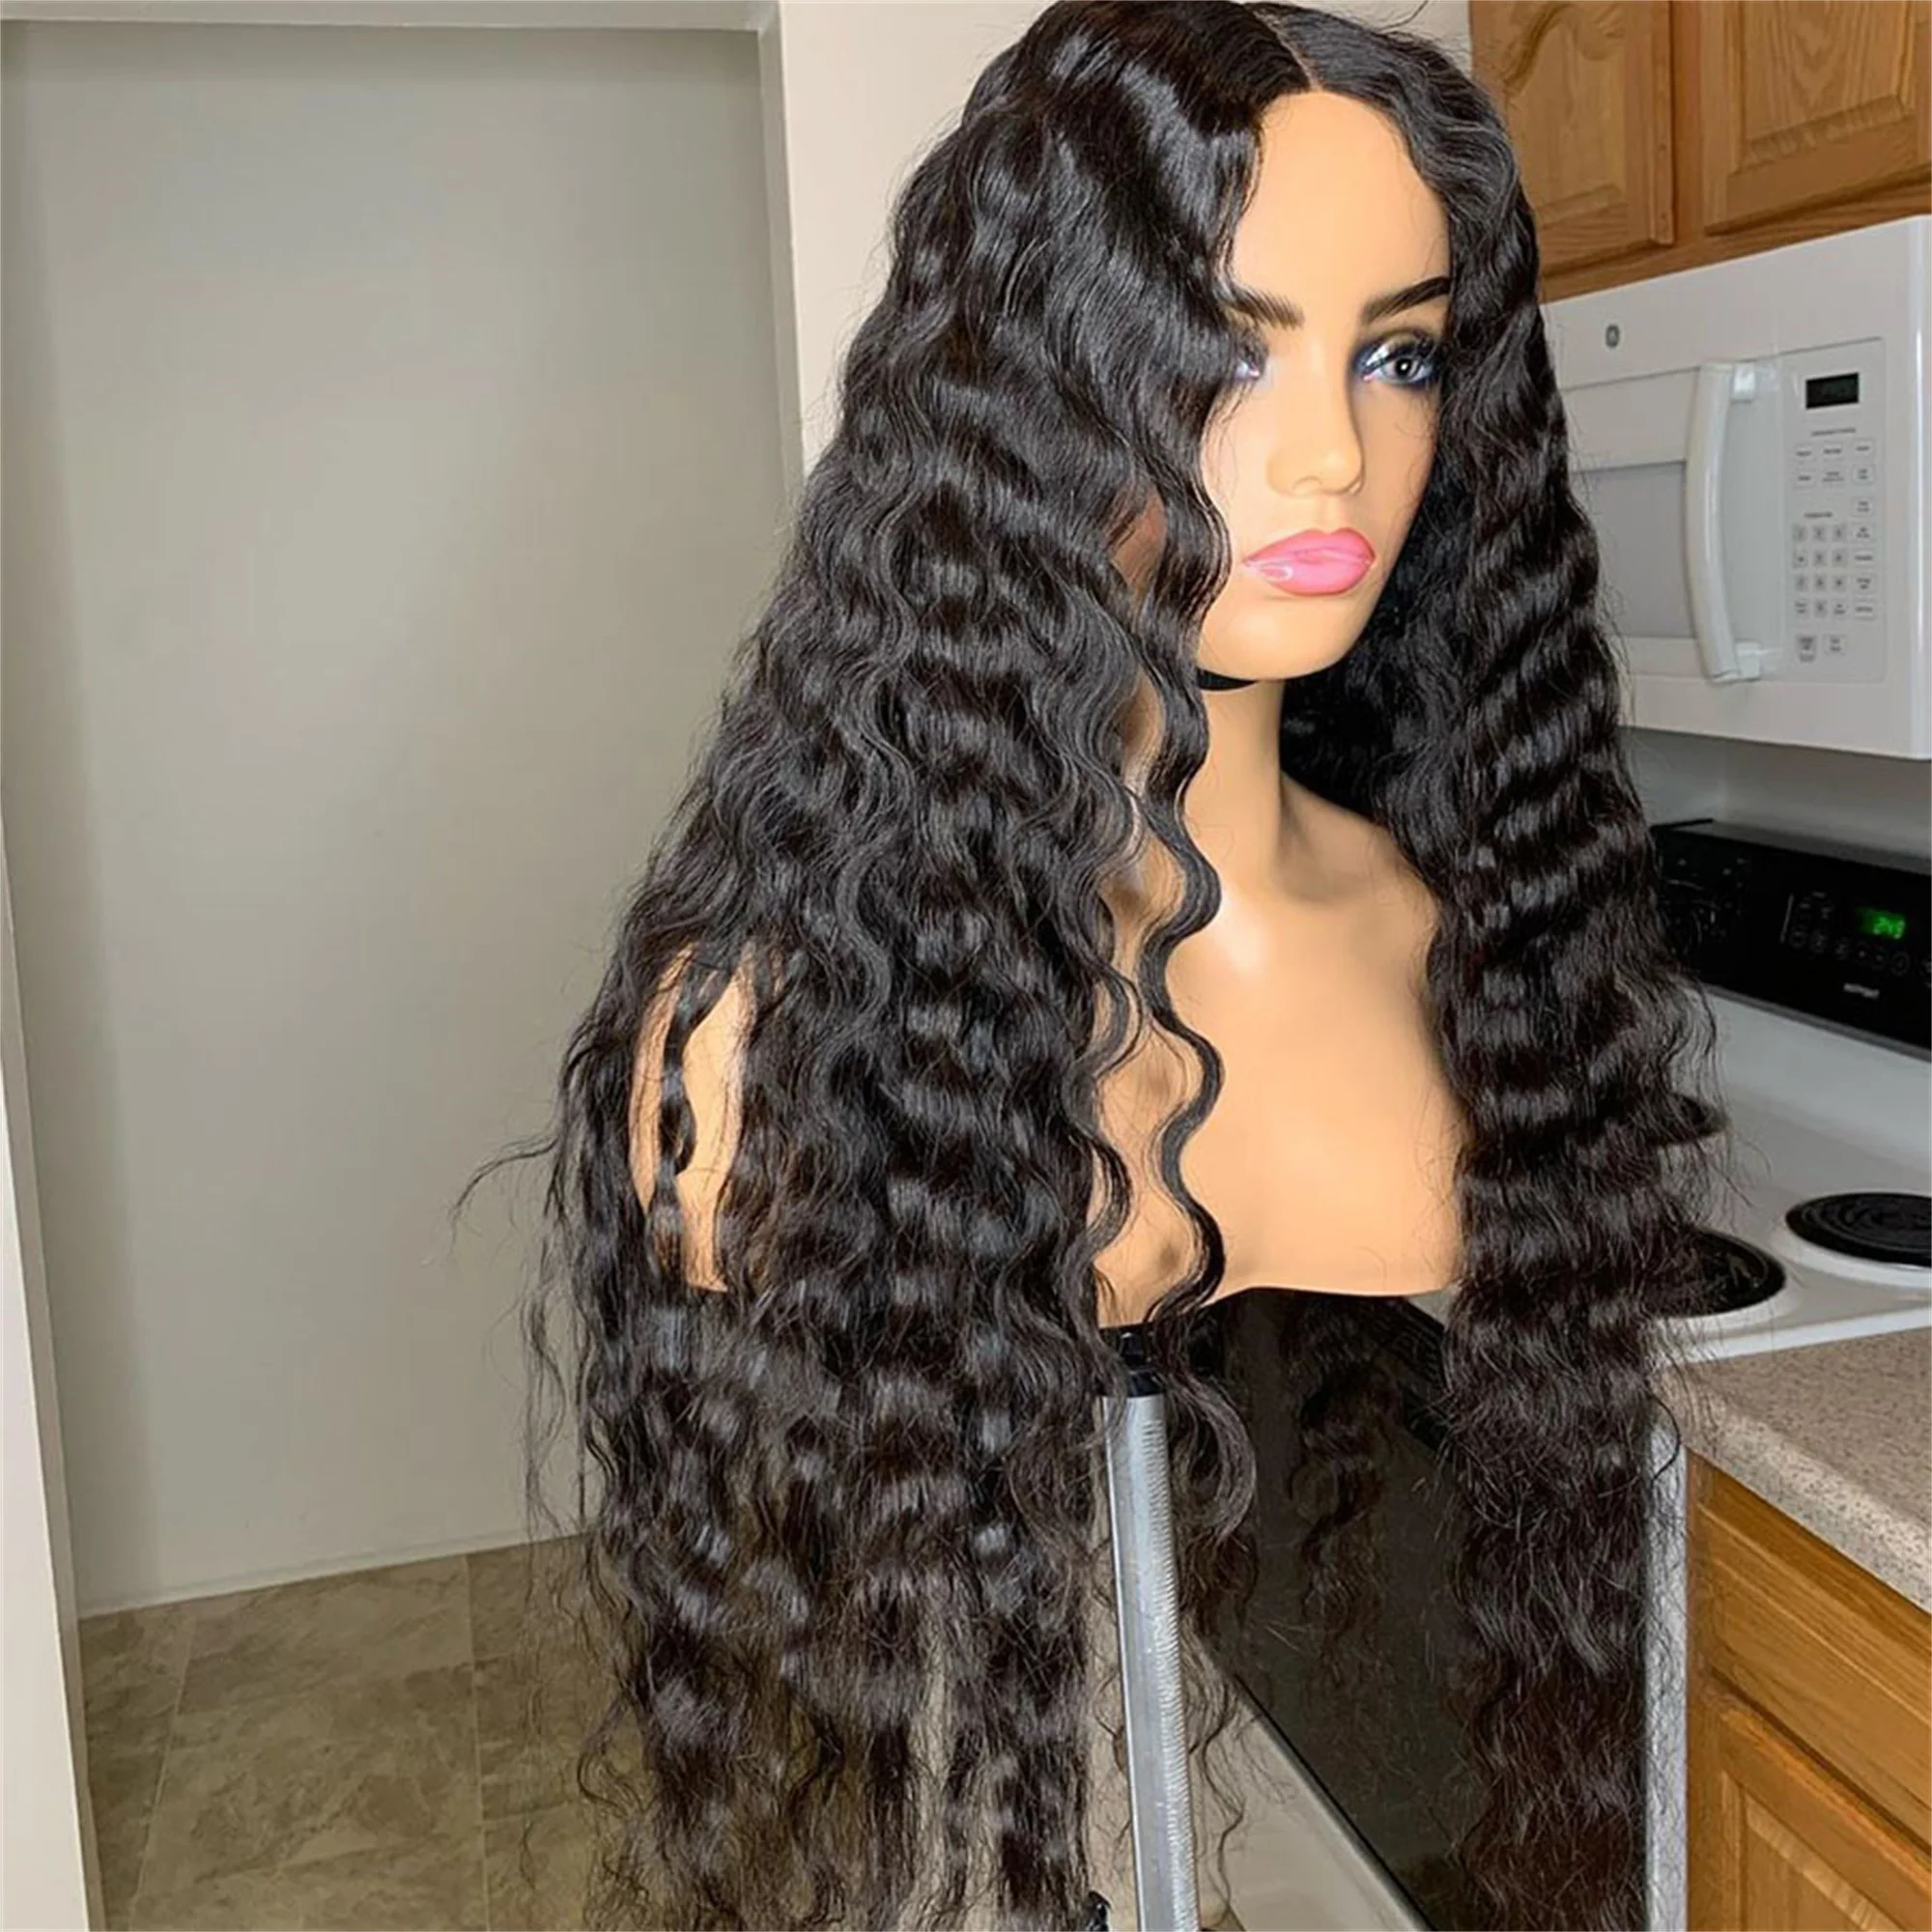 soft-26-“-long-deep-curly-natural-black-180density-lace-front-wig-for-black-women-babyhair-preplucked-heat-resistant-glueless